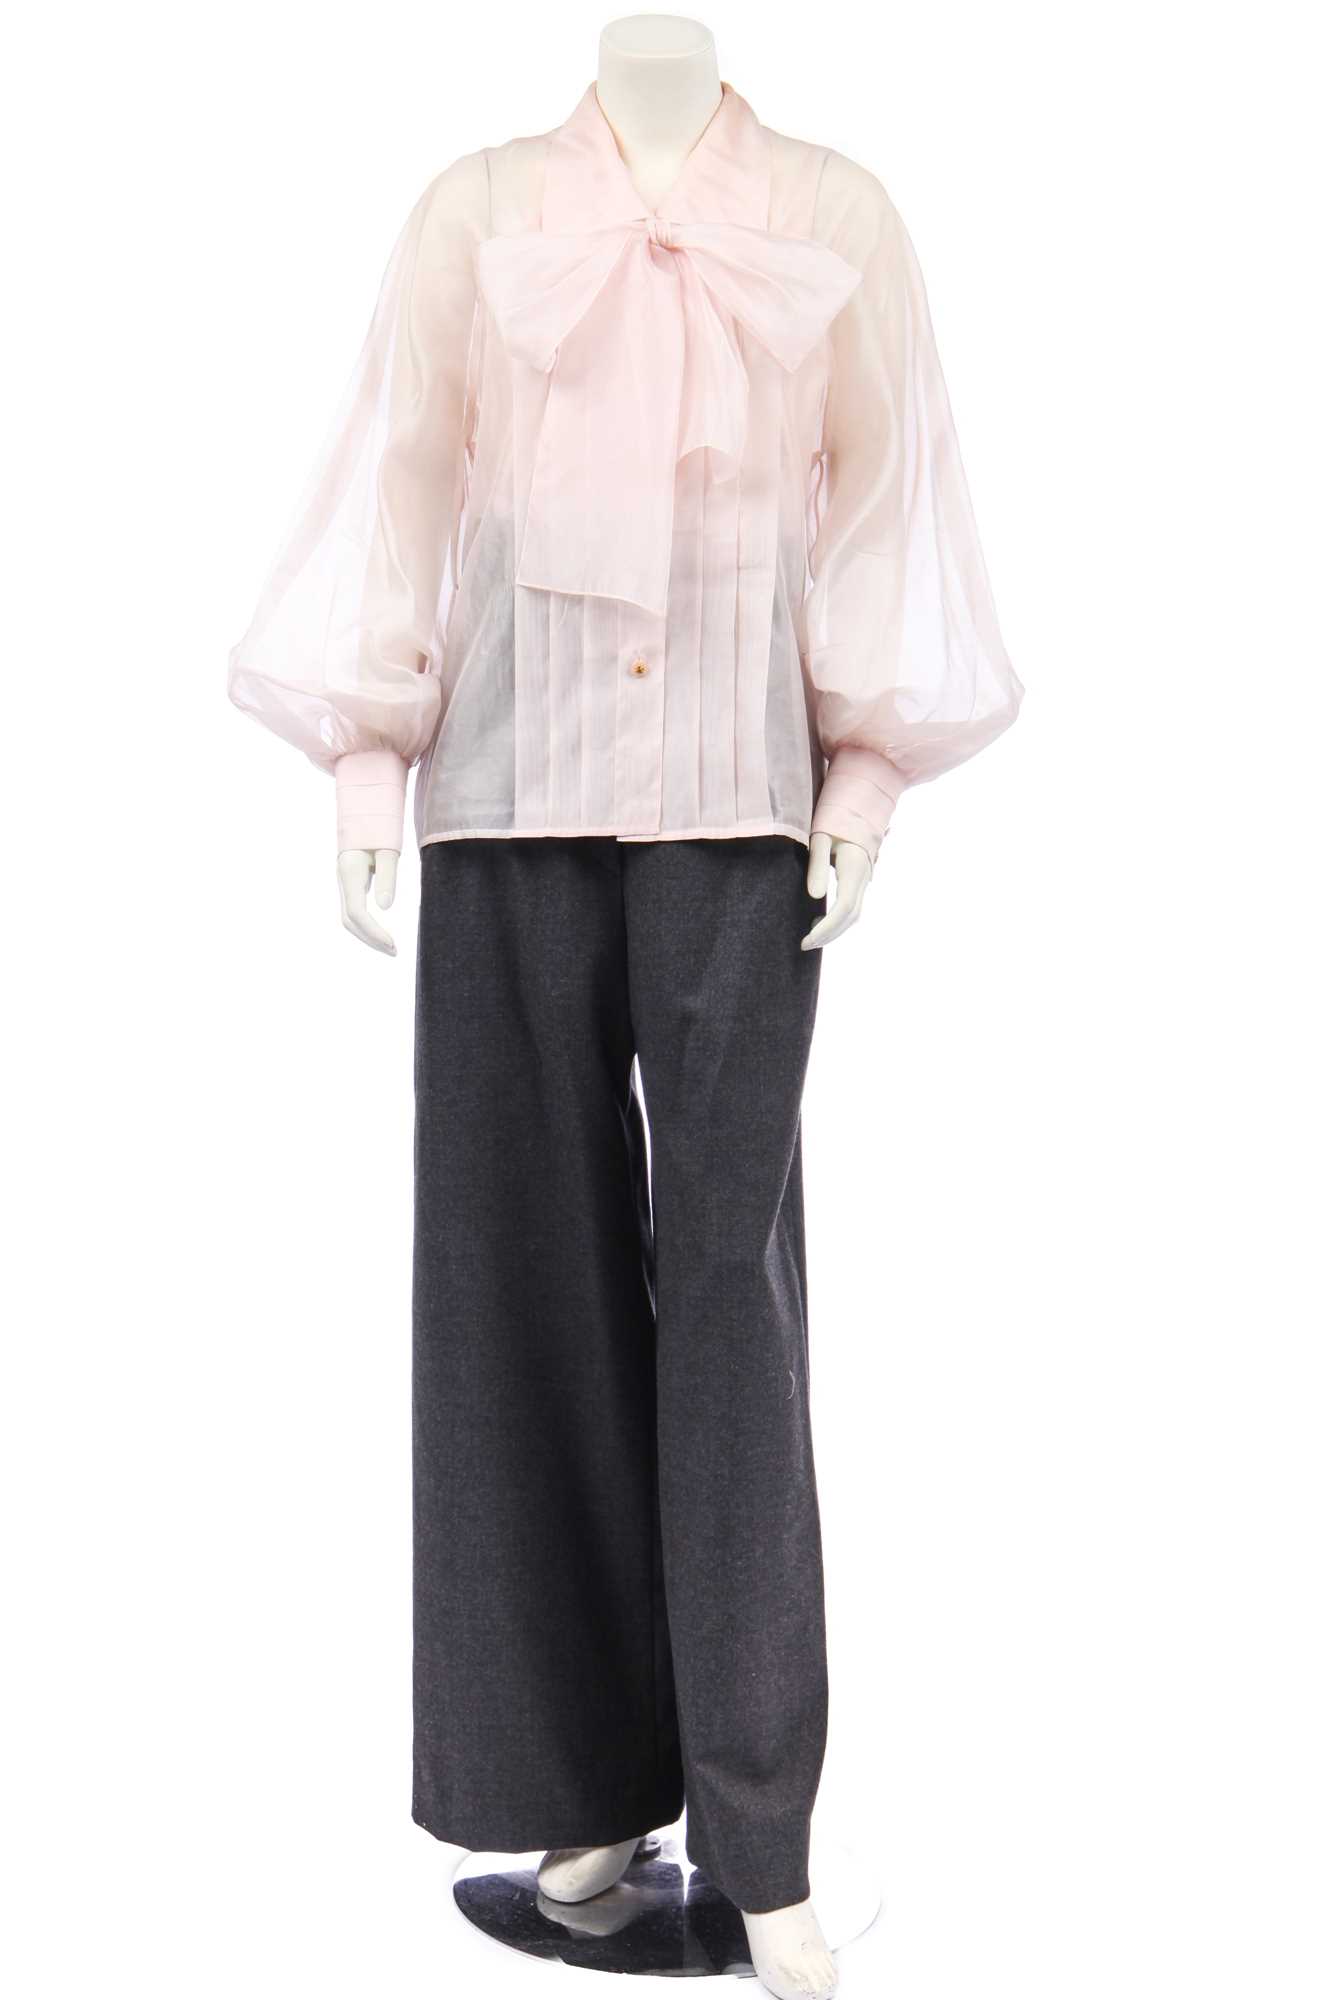 Lot 27 - A Chanel pink organza blouse and grey